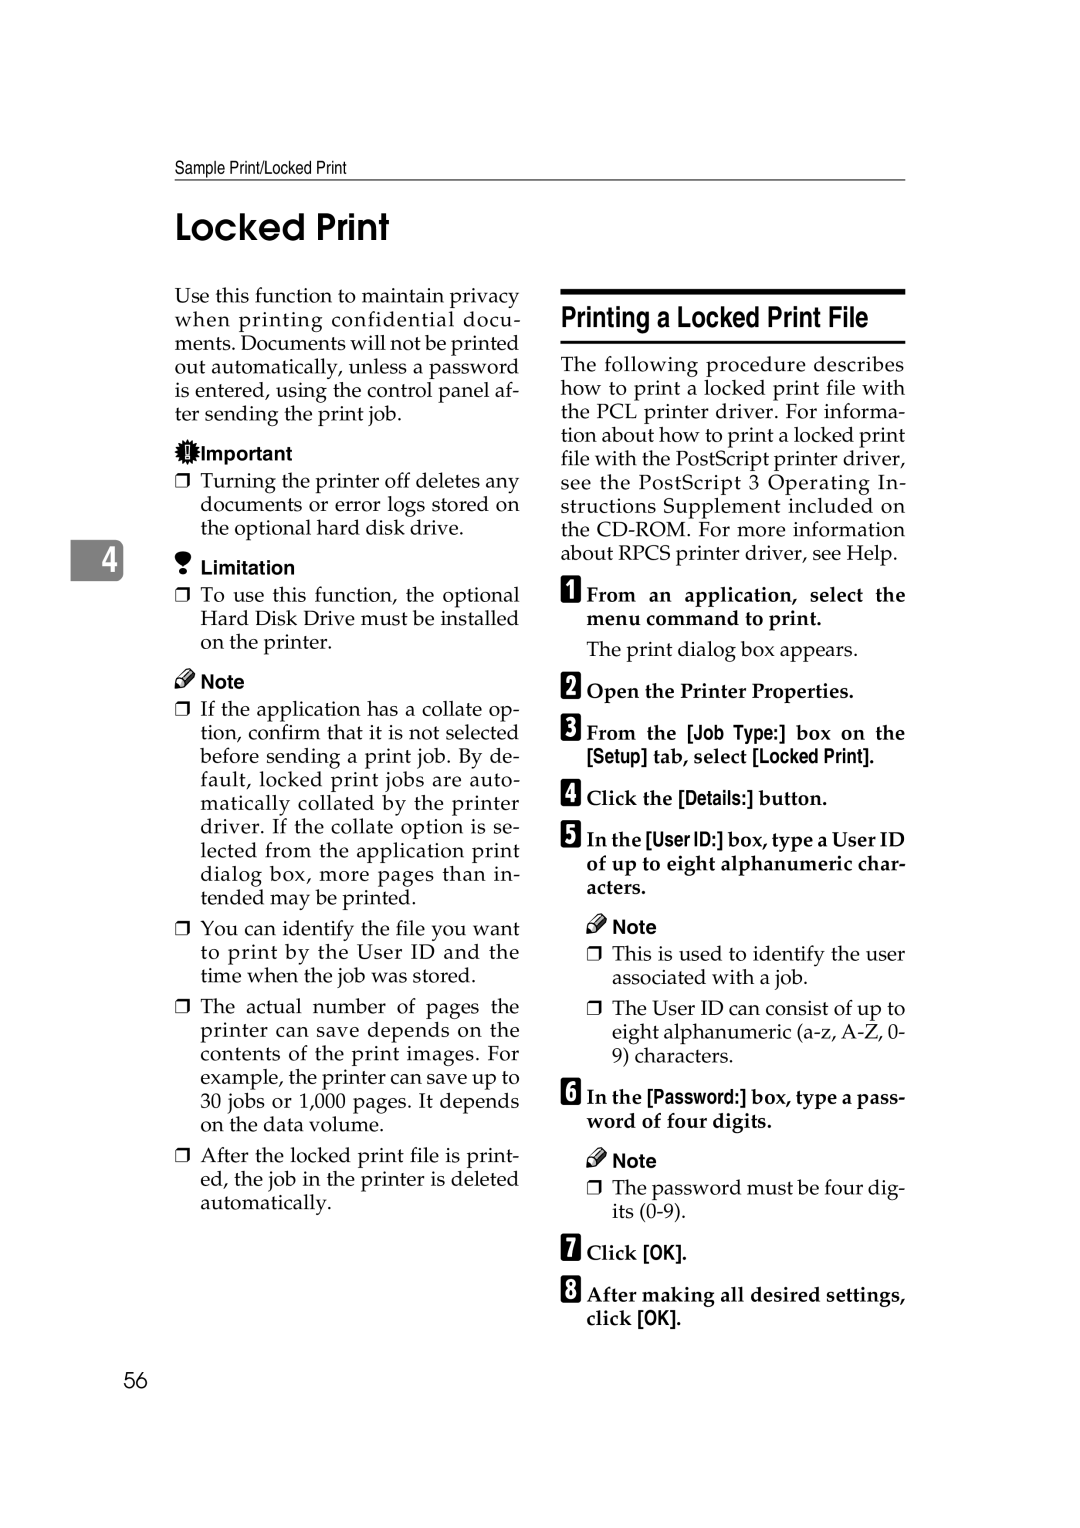 Lanier AP2610 manual Printing a Locked Print File, Password box, type a pass- word of four digits 